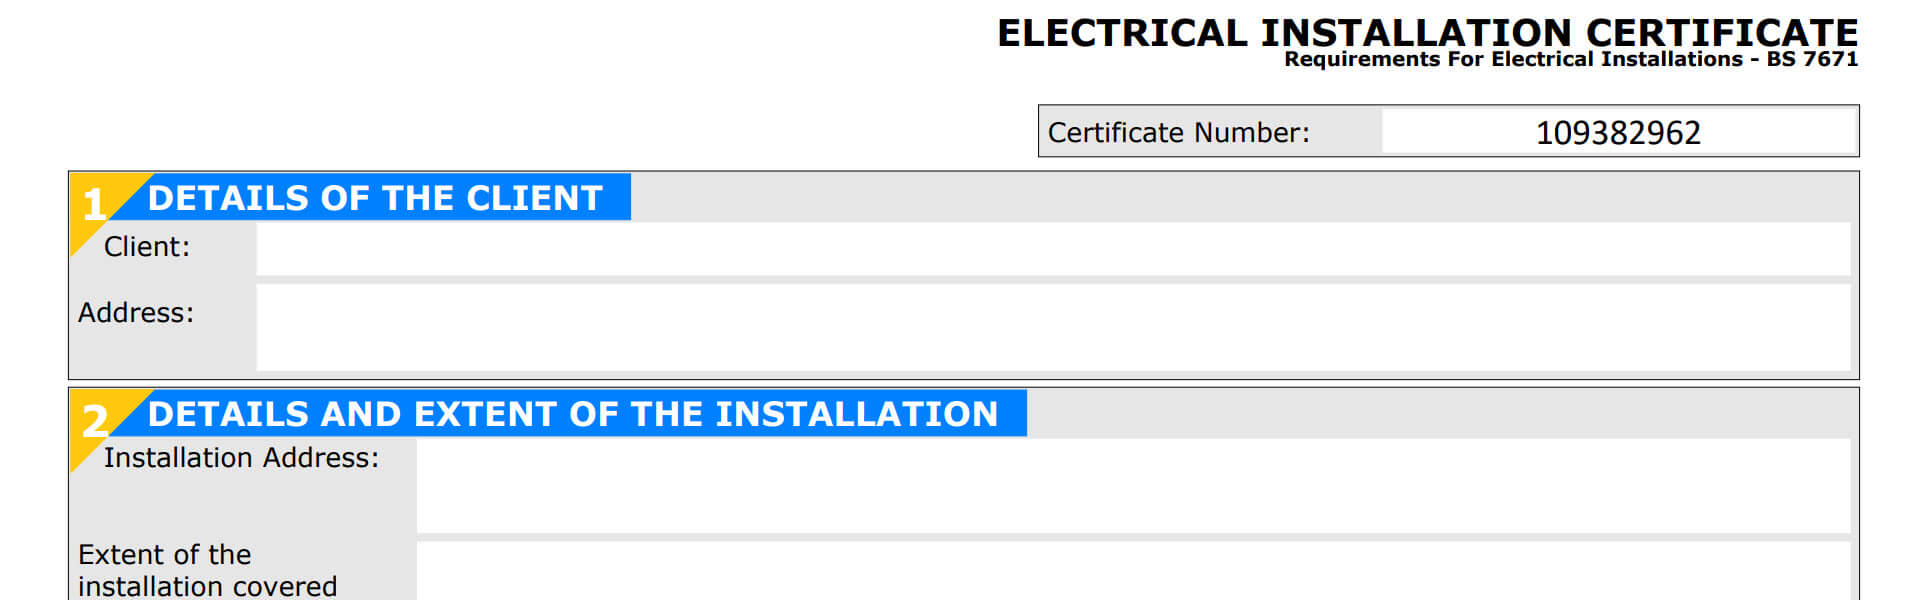 Electrical Installation Certificate.